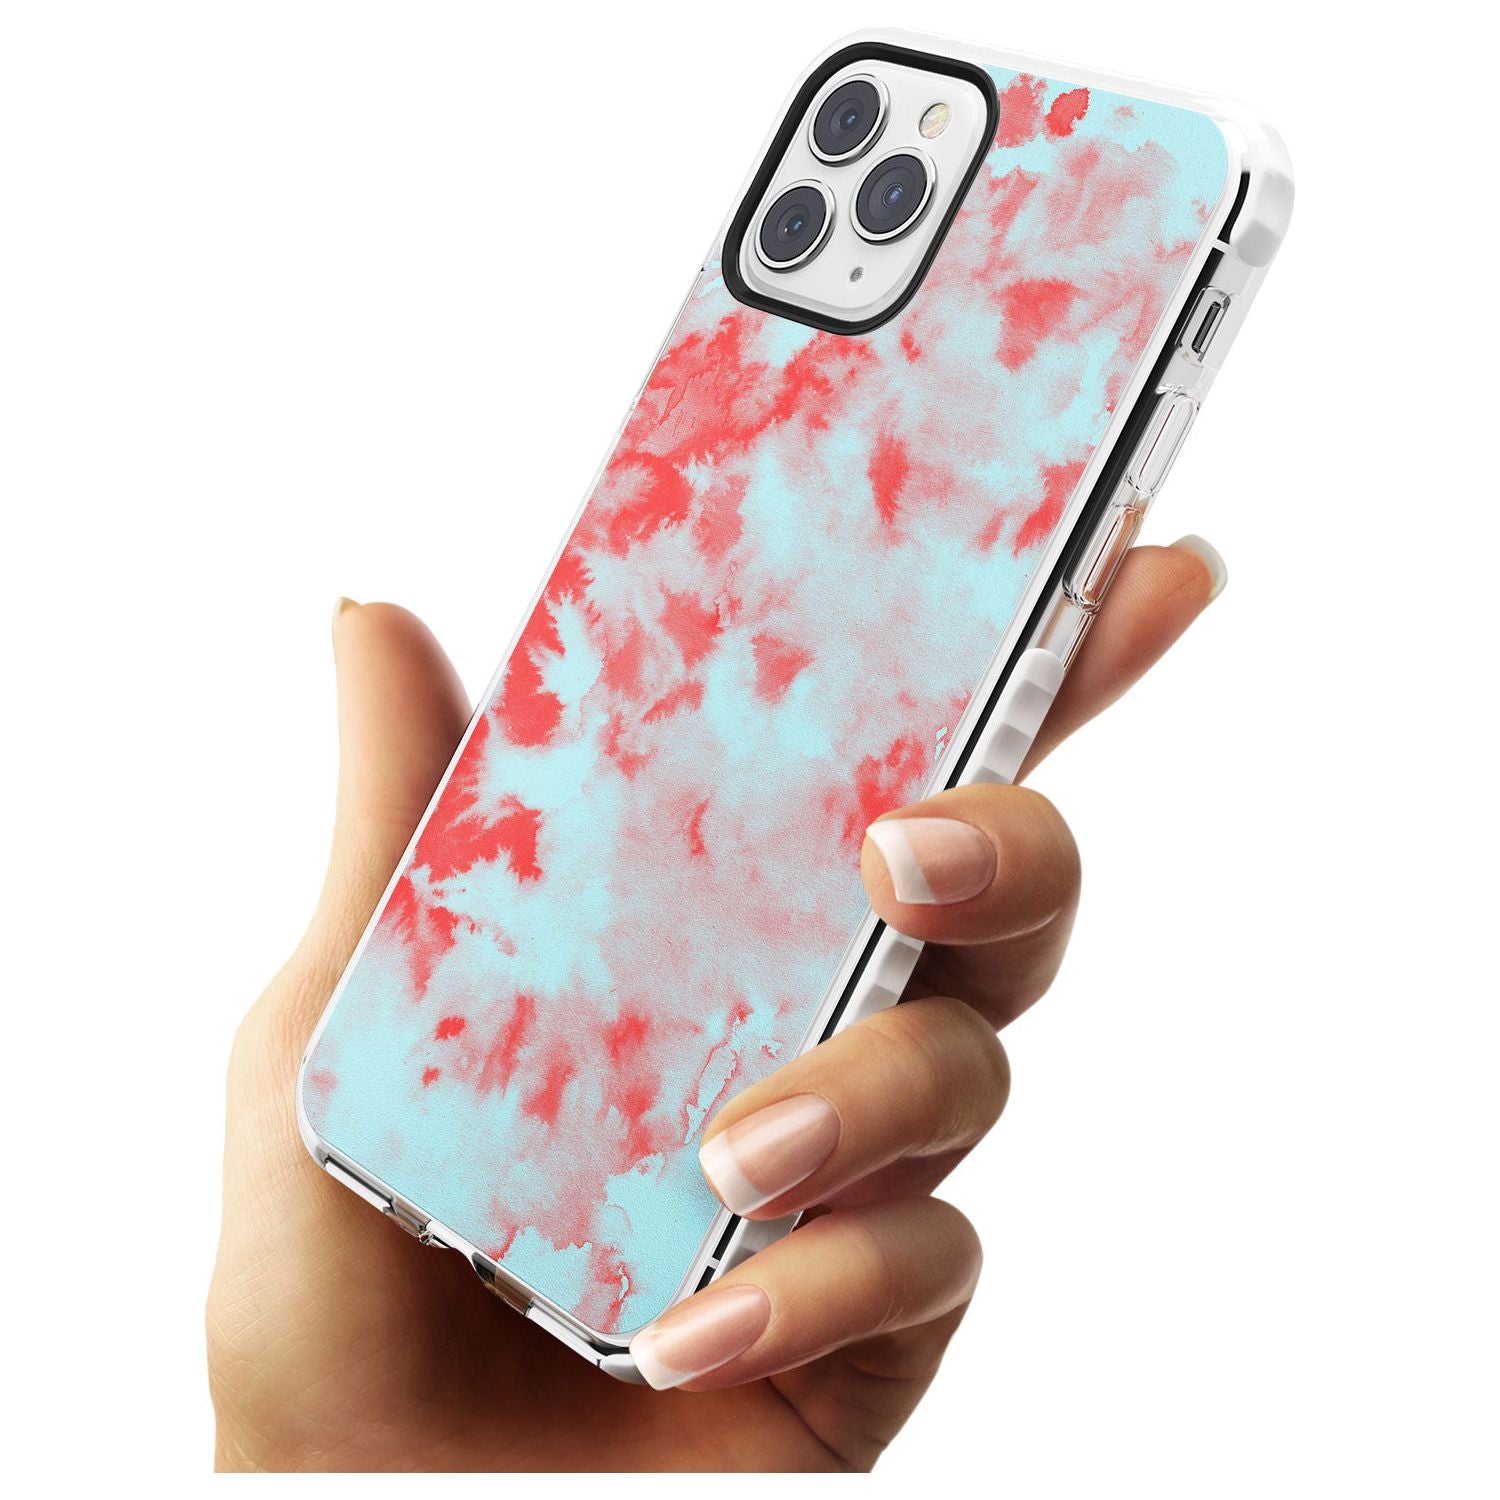 Red & Blue Acid Wash Tie-Dye Pattern Impact Phone Case for iPhone 11 Pro Max